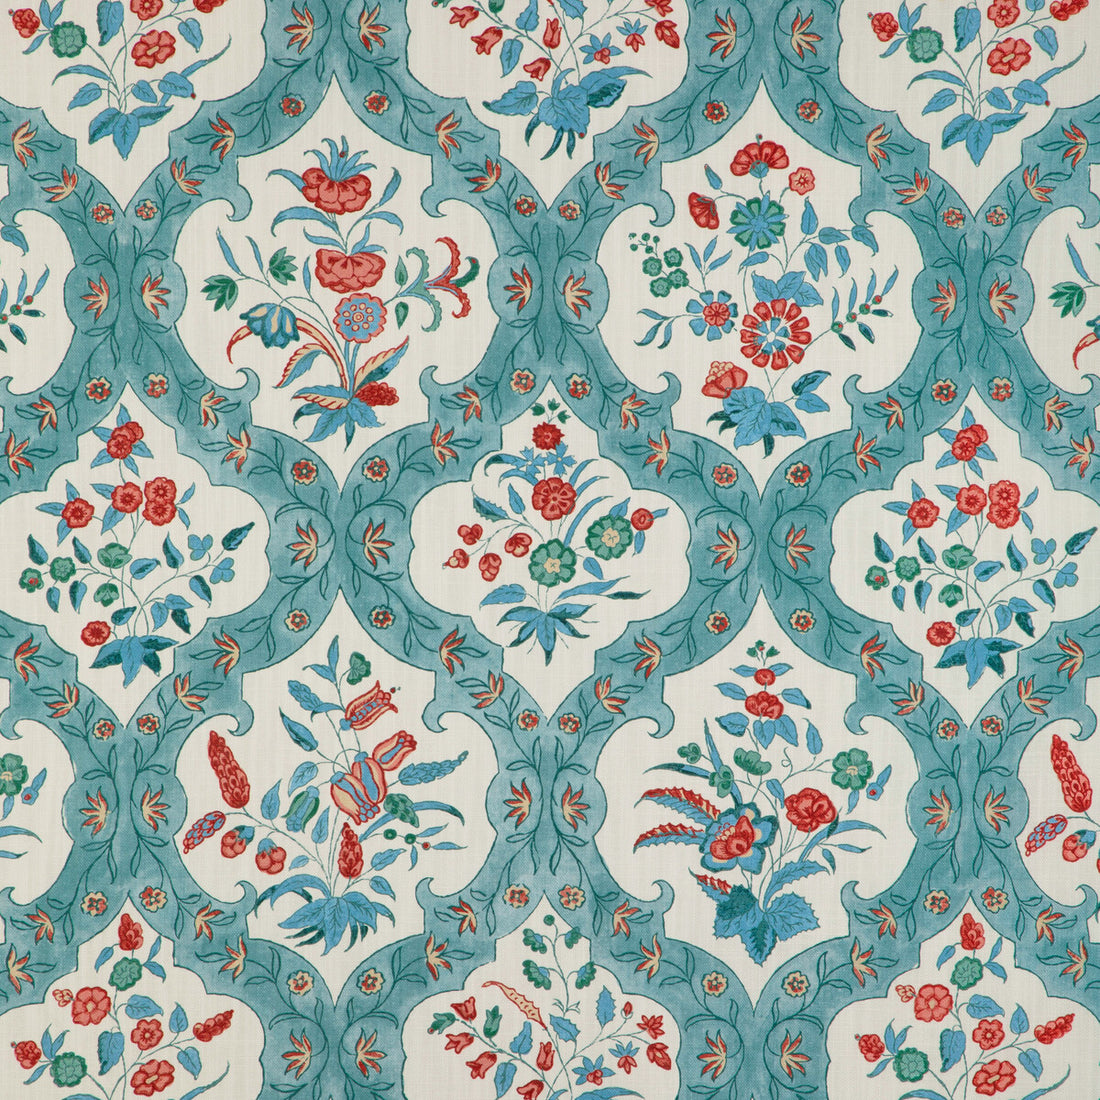 Ventoux Print fabric in teal/rose color - pattern 8023102.353.0 - by Brunschwig &amp; Fils in the Cadenet collection